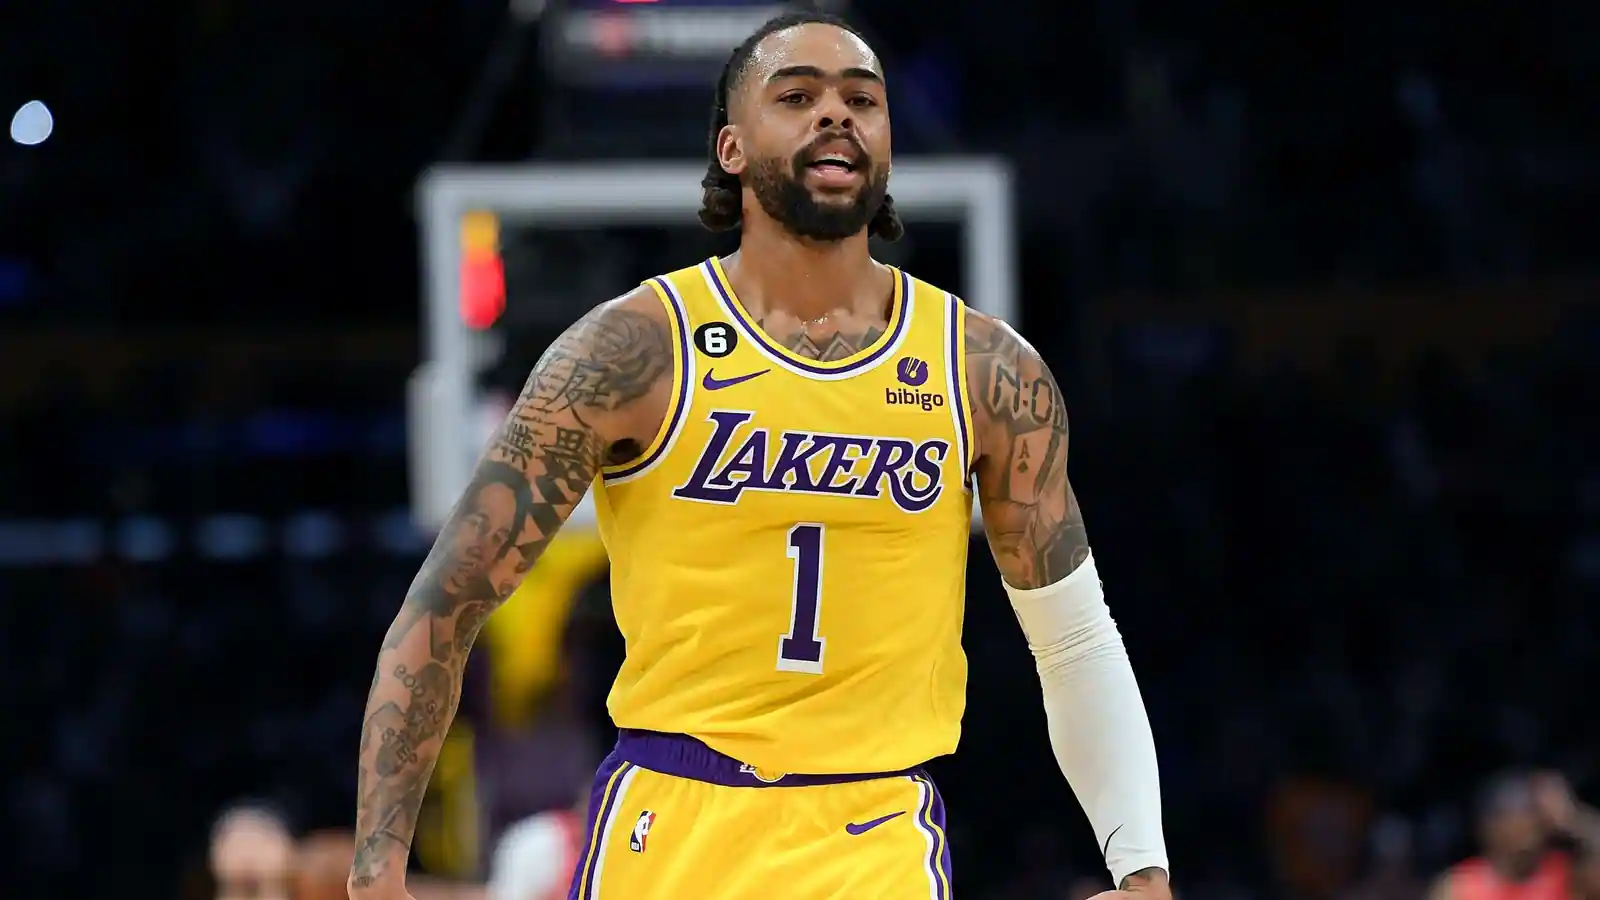 D'Angelo Russell's Stunning Comeback: Can He Lead the Lakers to Victory in the New NBA Season?